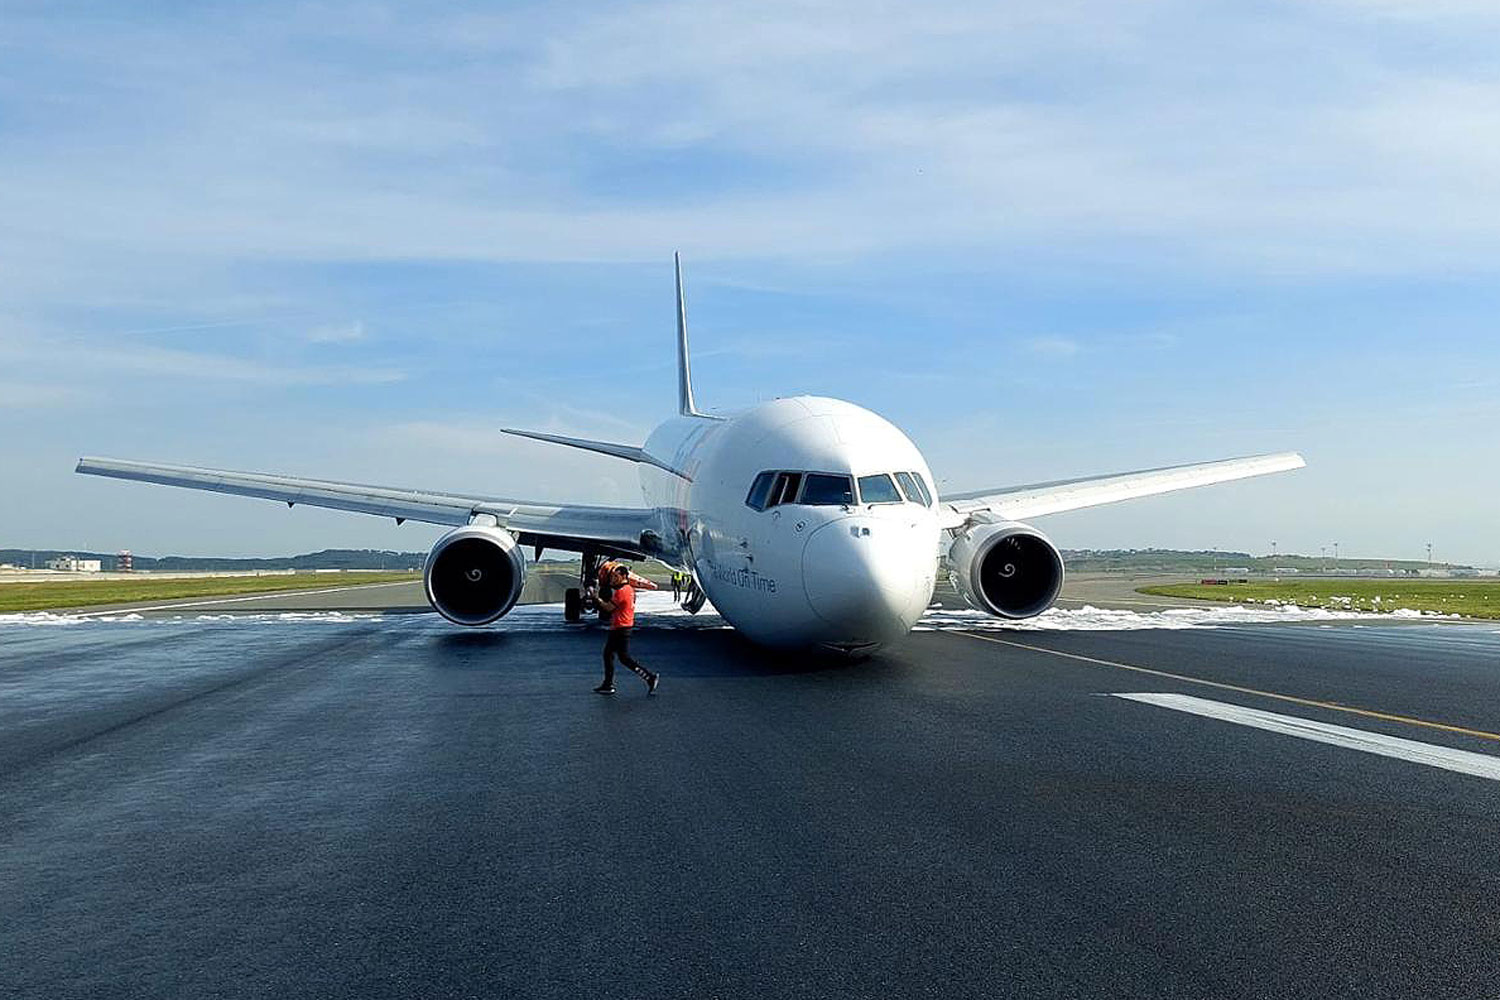 The FedEx Boeing 767F with the front landing gear retracted on the runway at Istanbul Airport